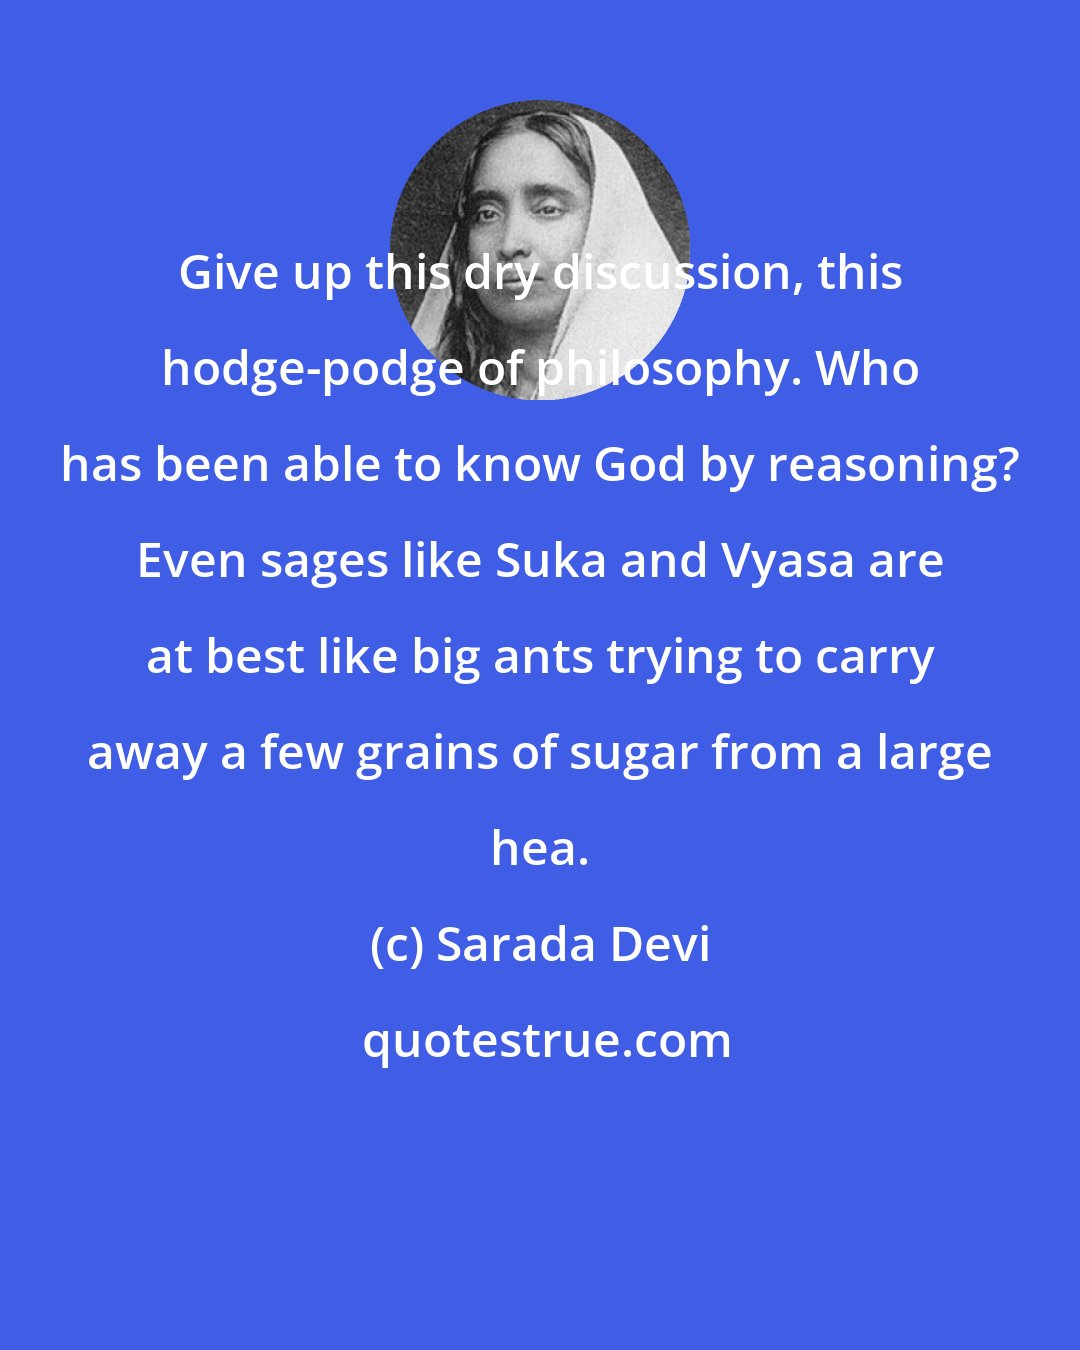 Sarada Devi: Give up this dry discussion, this hodge-podge of philosophy. Who has been able to know God by reasoning? Even sages like Suka and Vyasa are at best like big ants trying to carry away a few grains of sugar from a large hea.